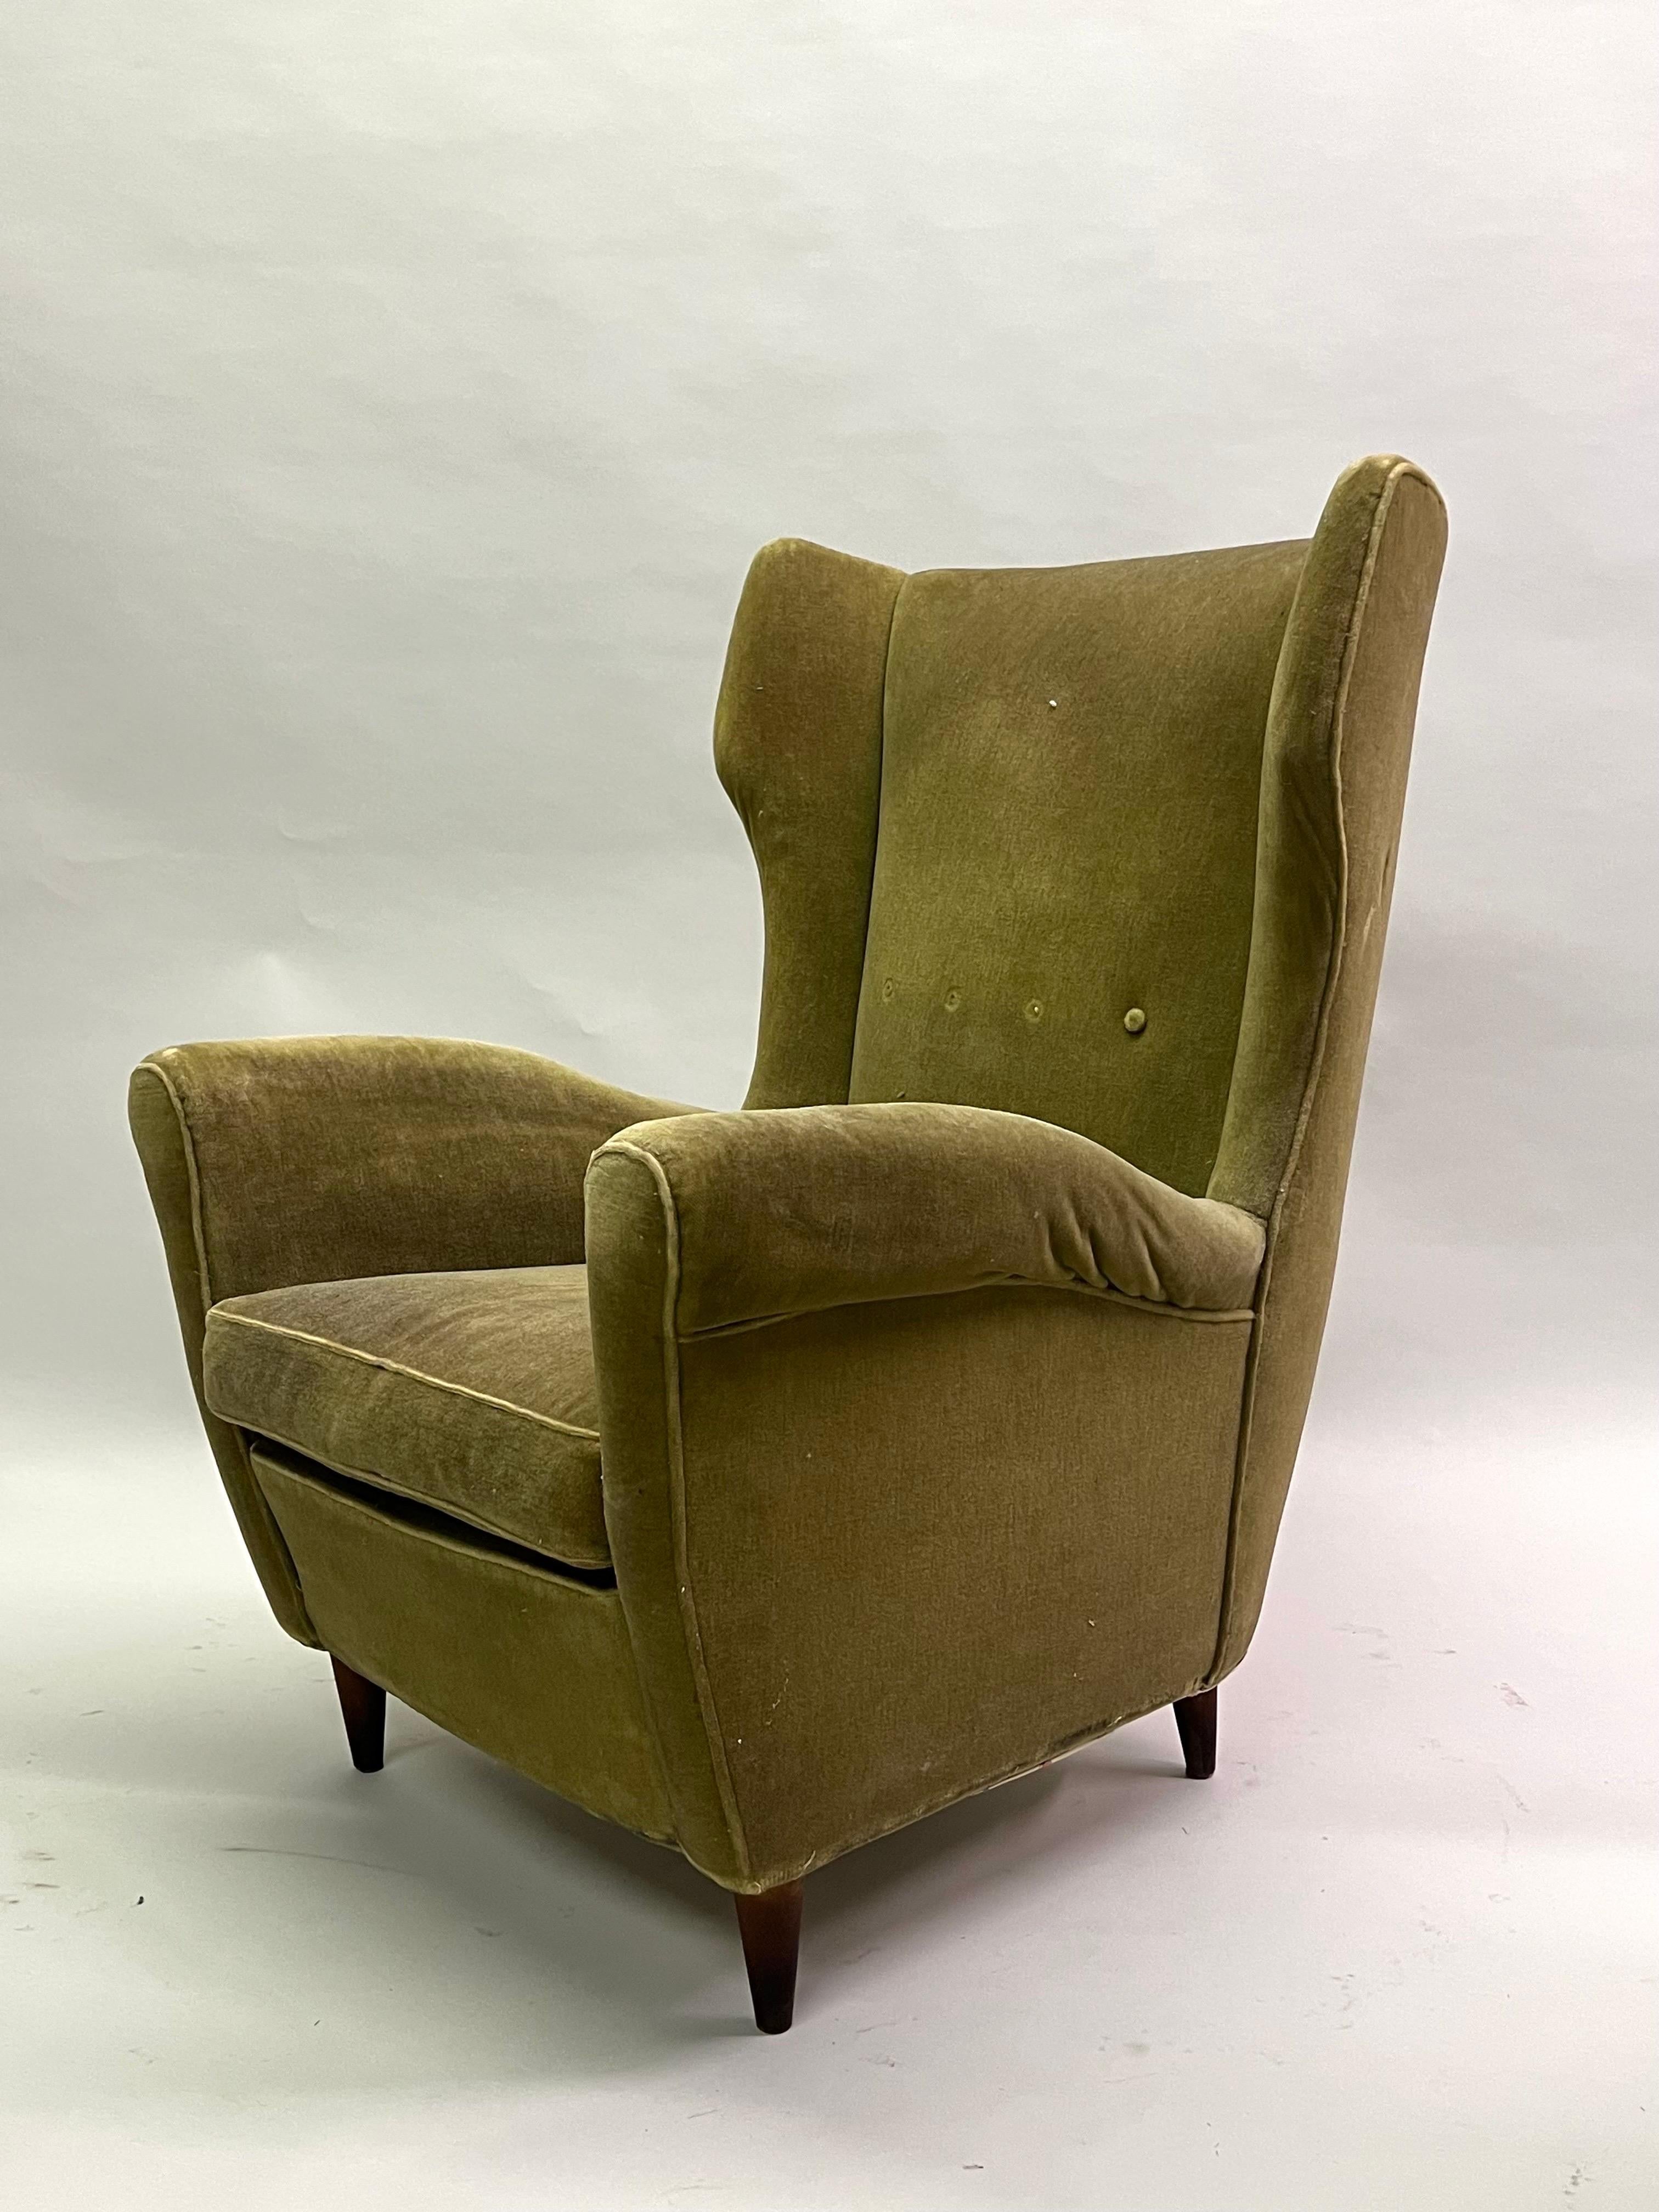 Pair of Italian Mid-Century Wingback Lounge Chairs Attr. to Gio Ponti, Model 512 For Sale 5